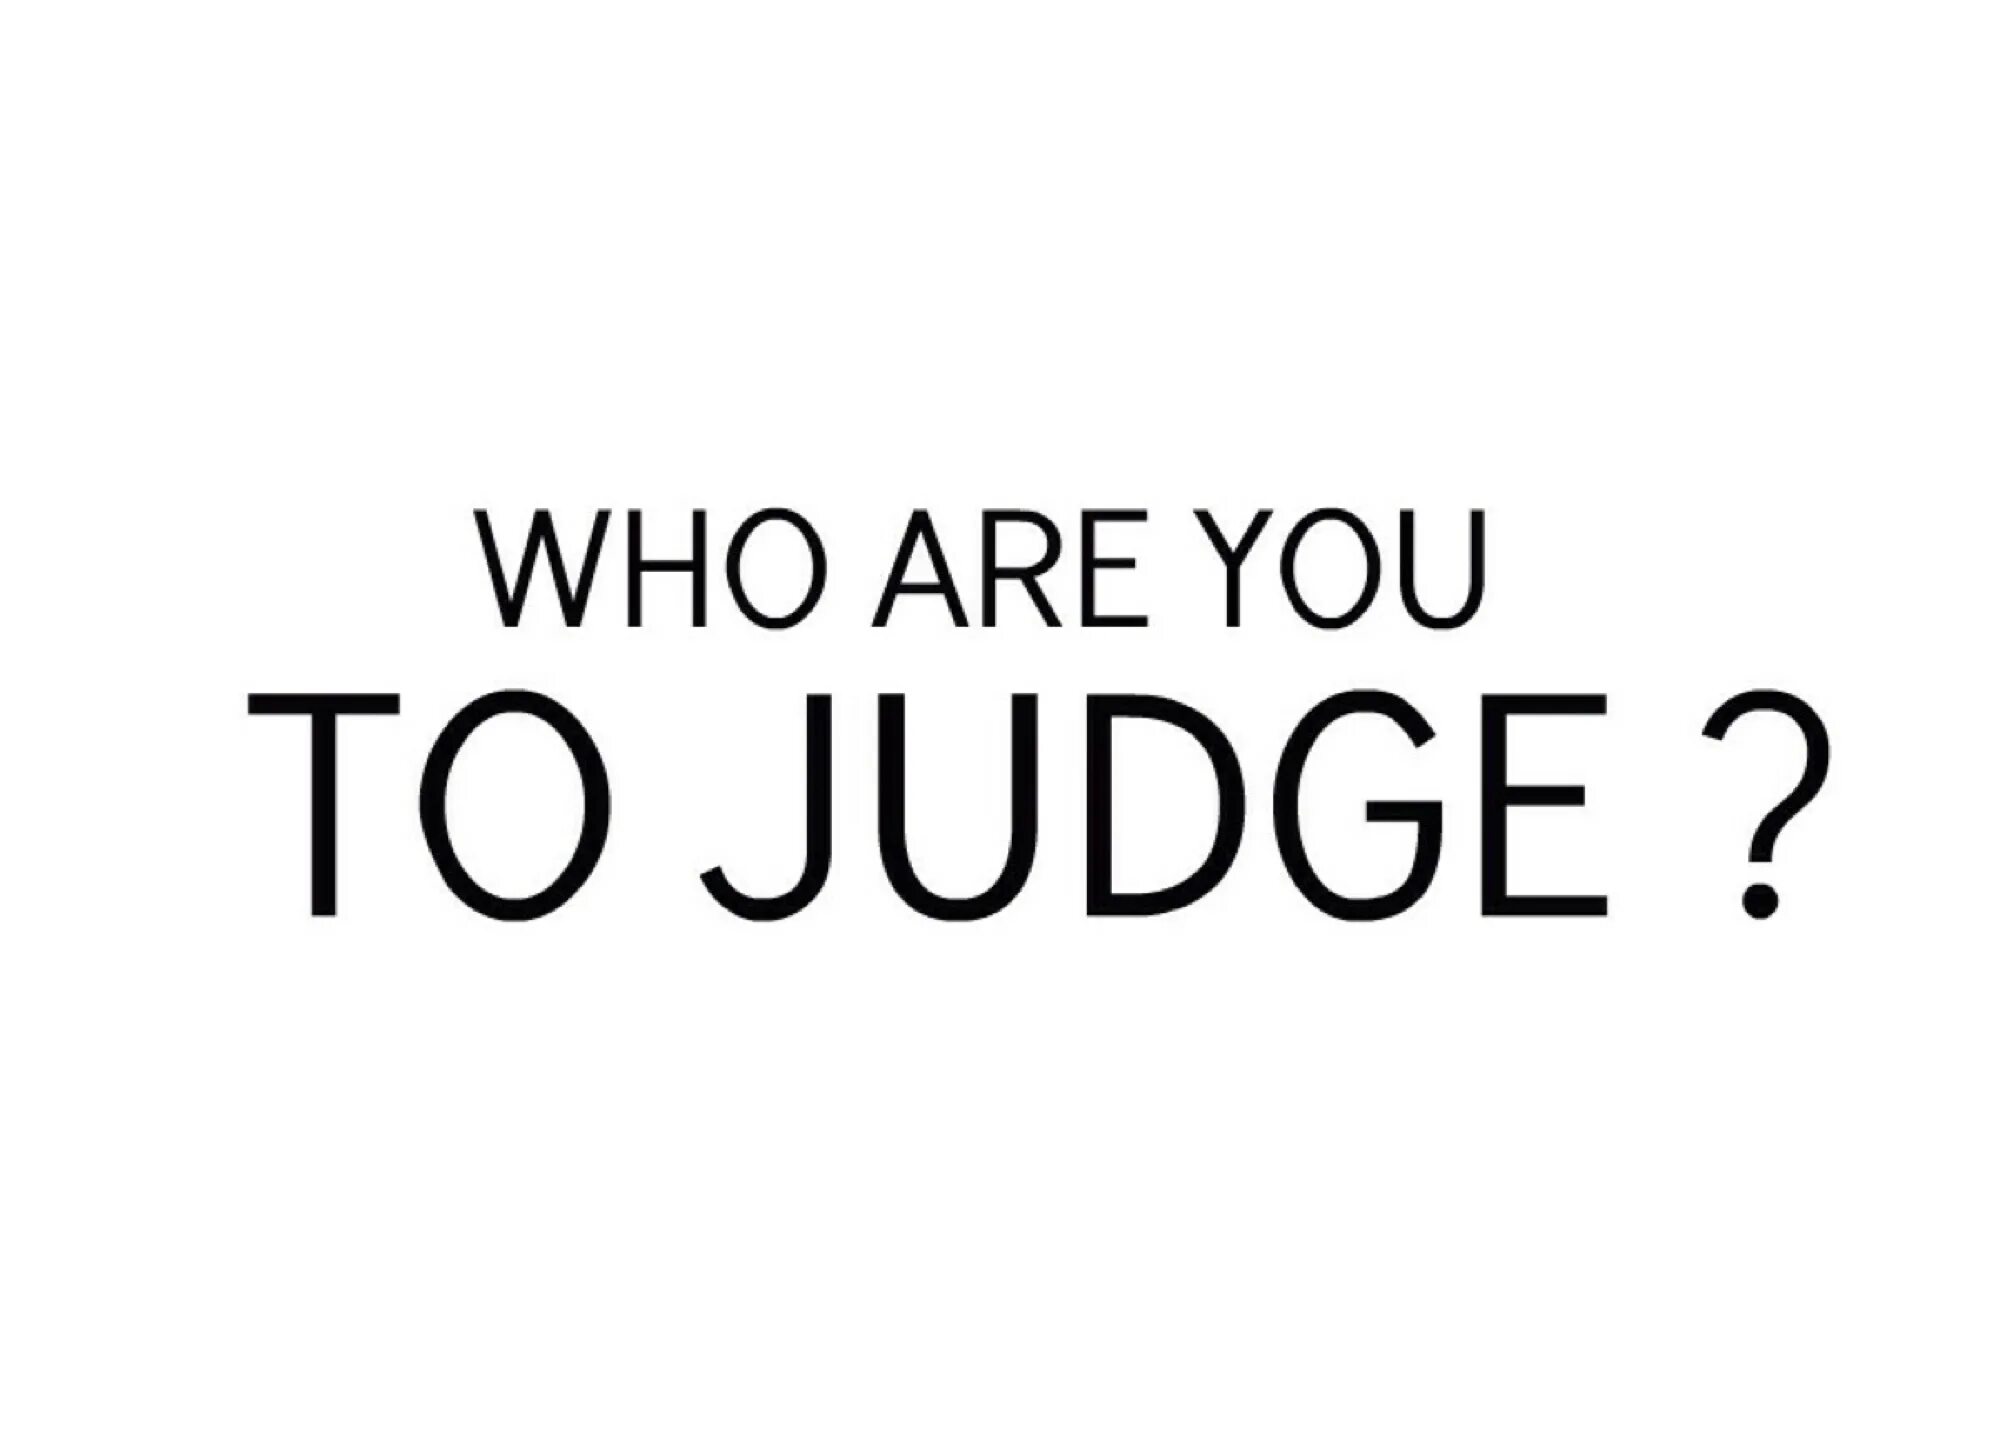 Who надпись. Who are you. Who are you to judge. Are you who you are. Who forum